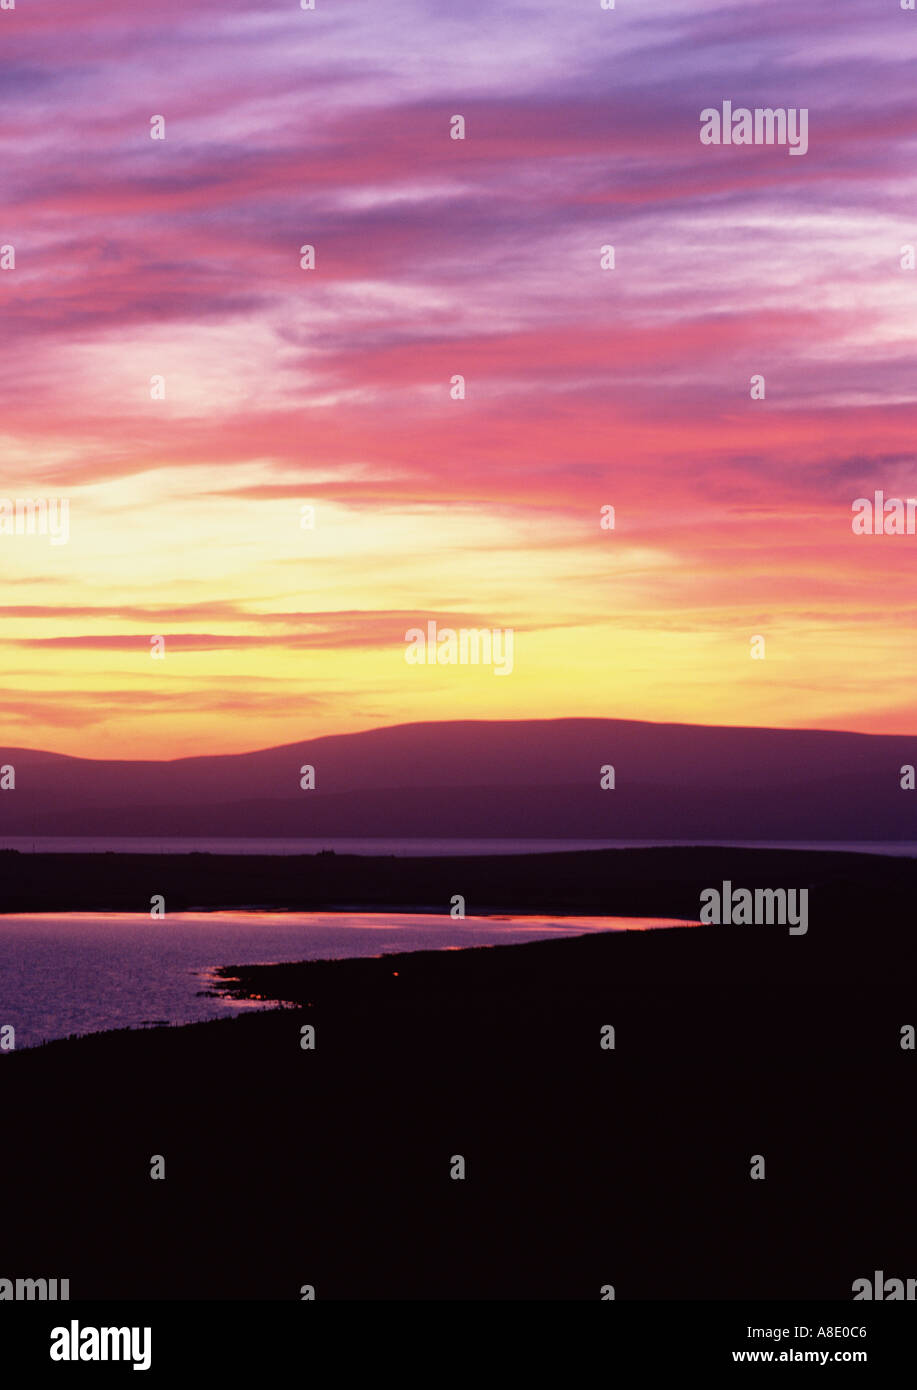 dh Scotland island Sunset SCAPA FLOW ORKNEY ISLES Red purple dusk skies sky twilight clouds colourful empty remoteness uk early Stock Photo